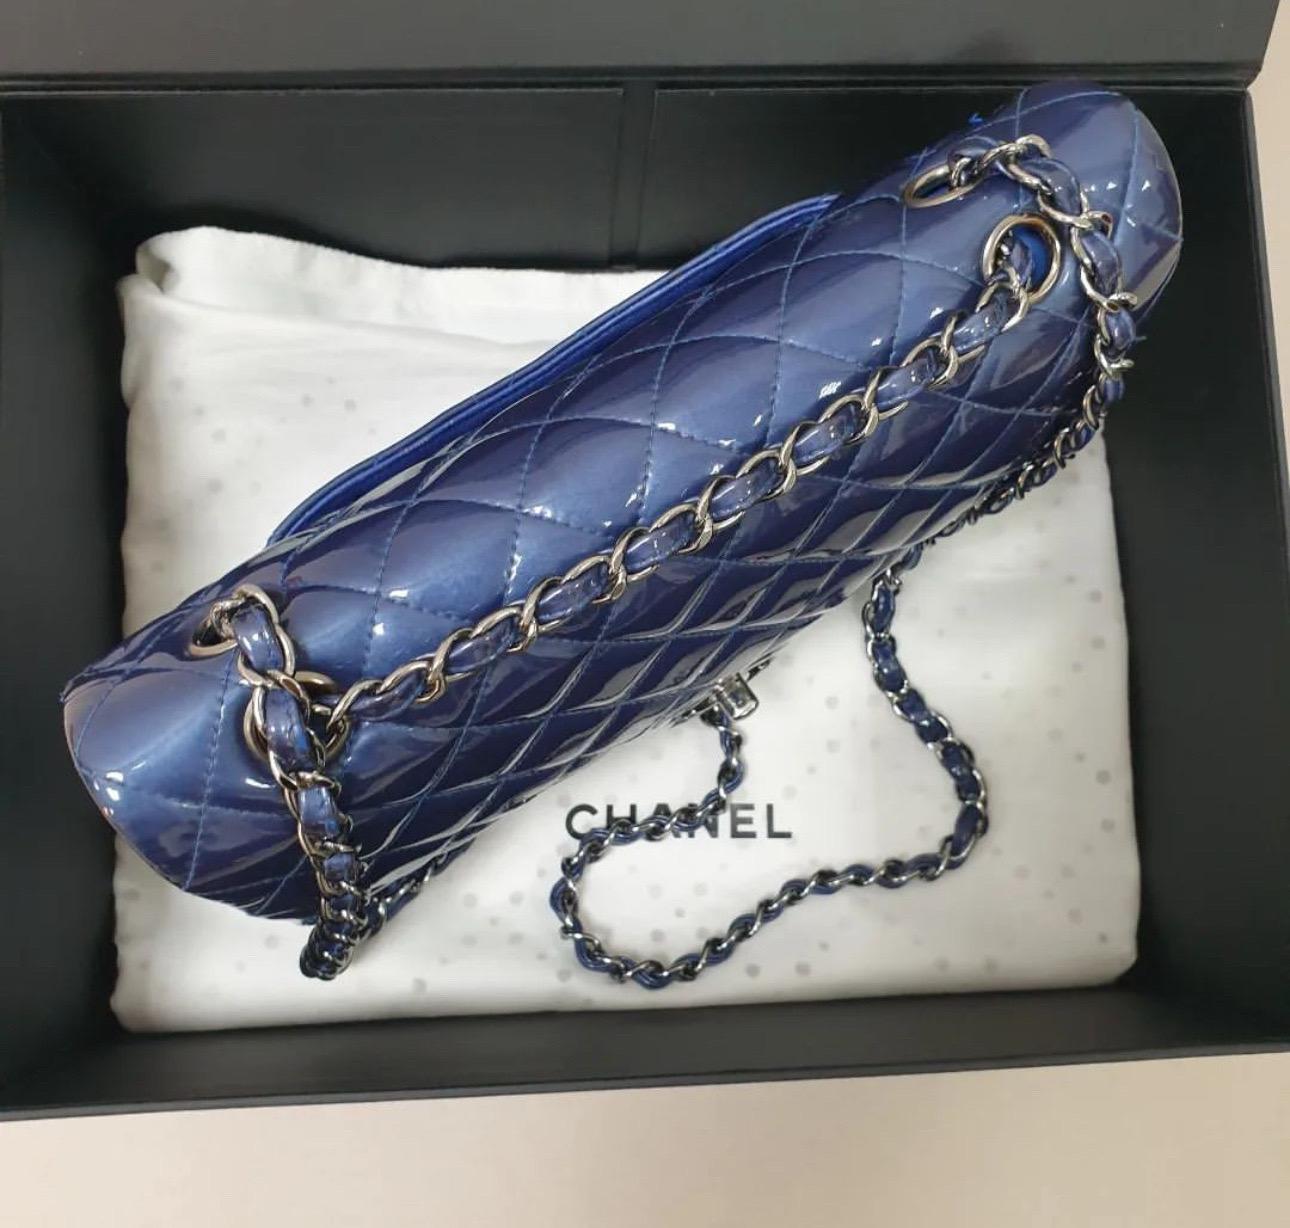 Absolutely Stunning Chanel Timeless Classic Jumbo in Blue Patent Leather with silver hardware.
26*16*6 cm
From Cruise 2013
Very good condition. Slight signs of wear seen on pics

No box. No dust bag.